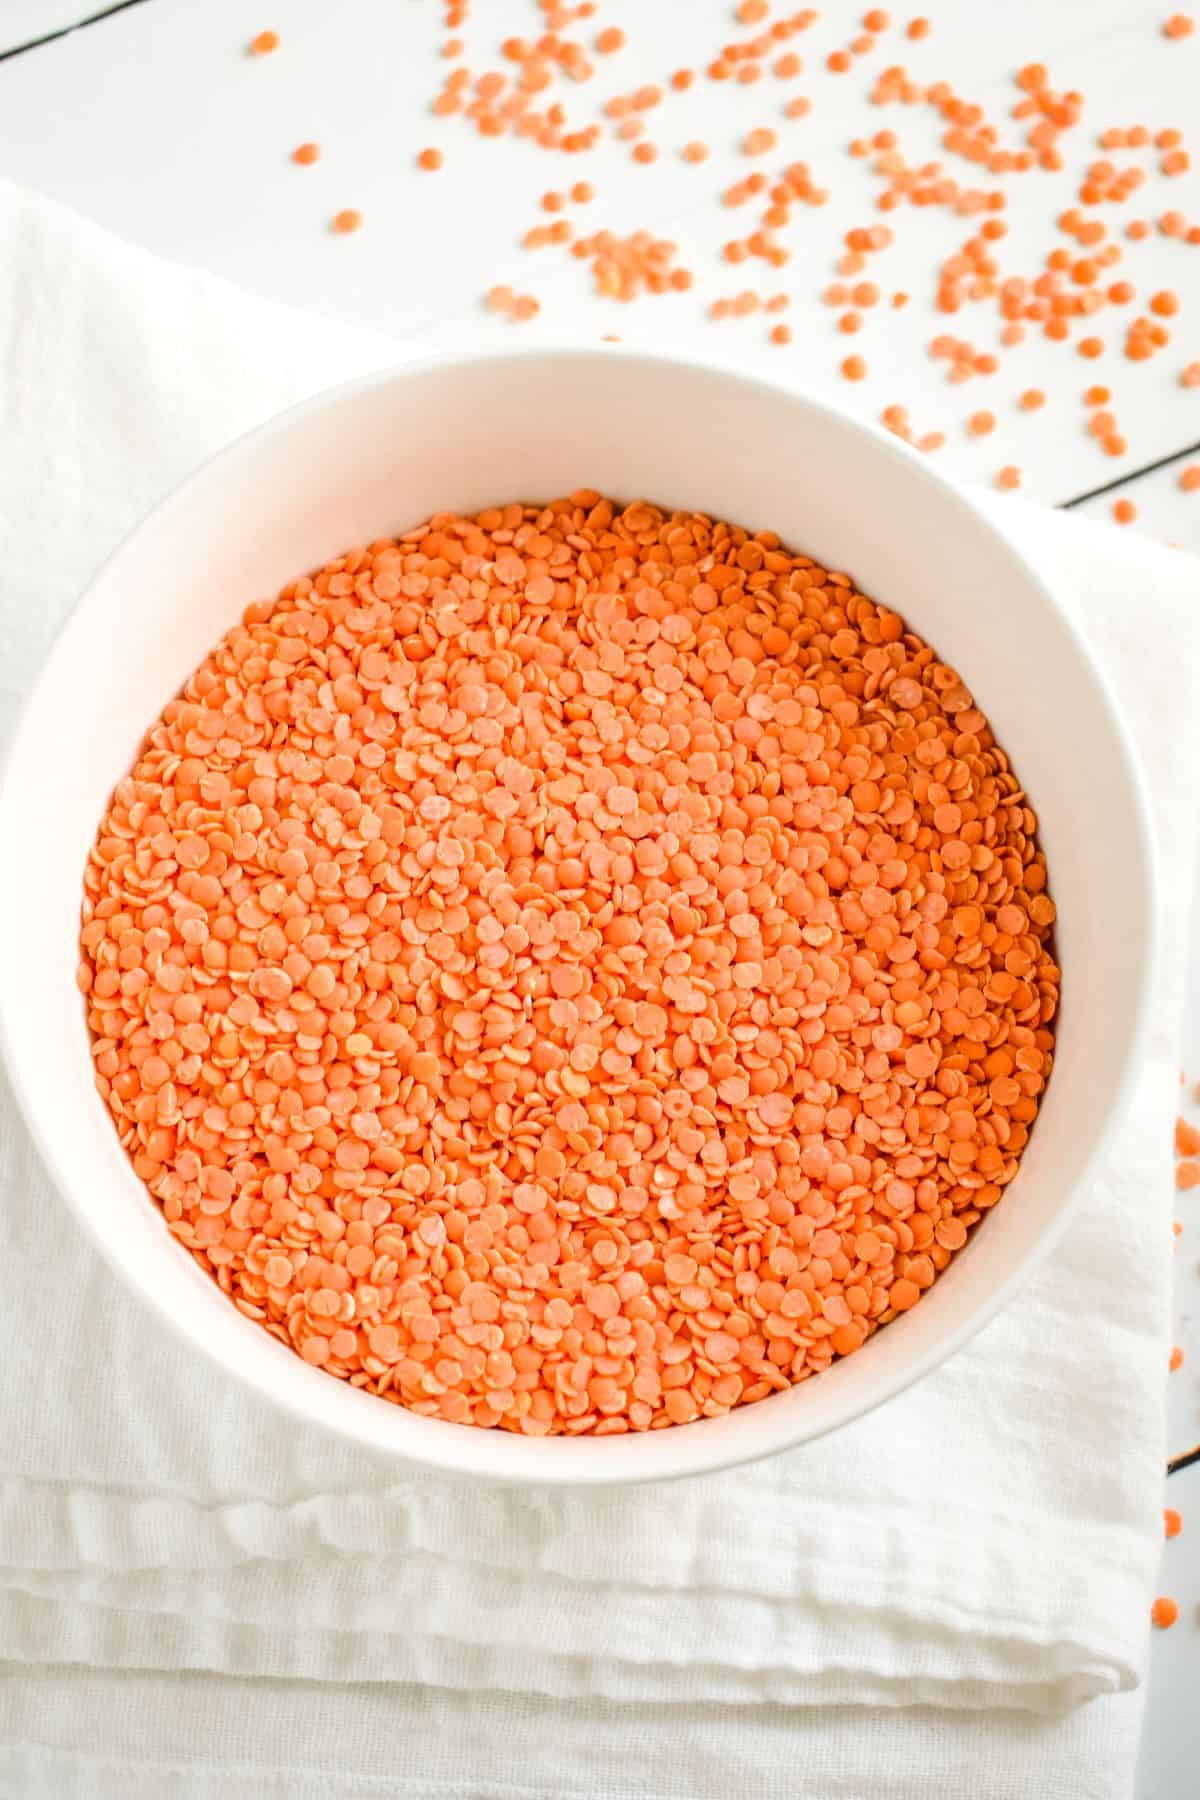 overhead of dry red lentils in a white bowl with some on the table behind it.